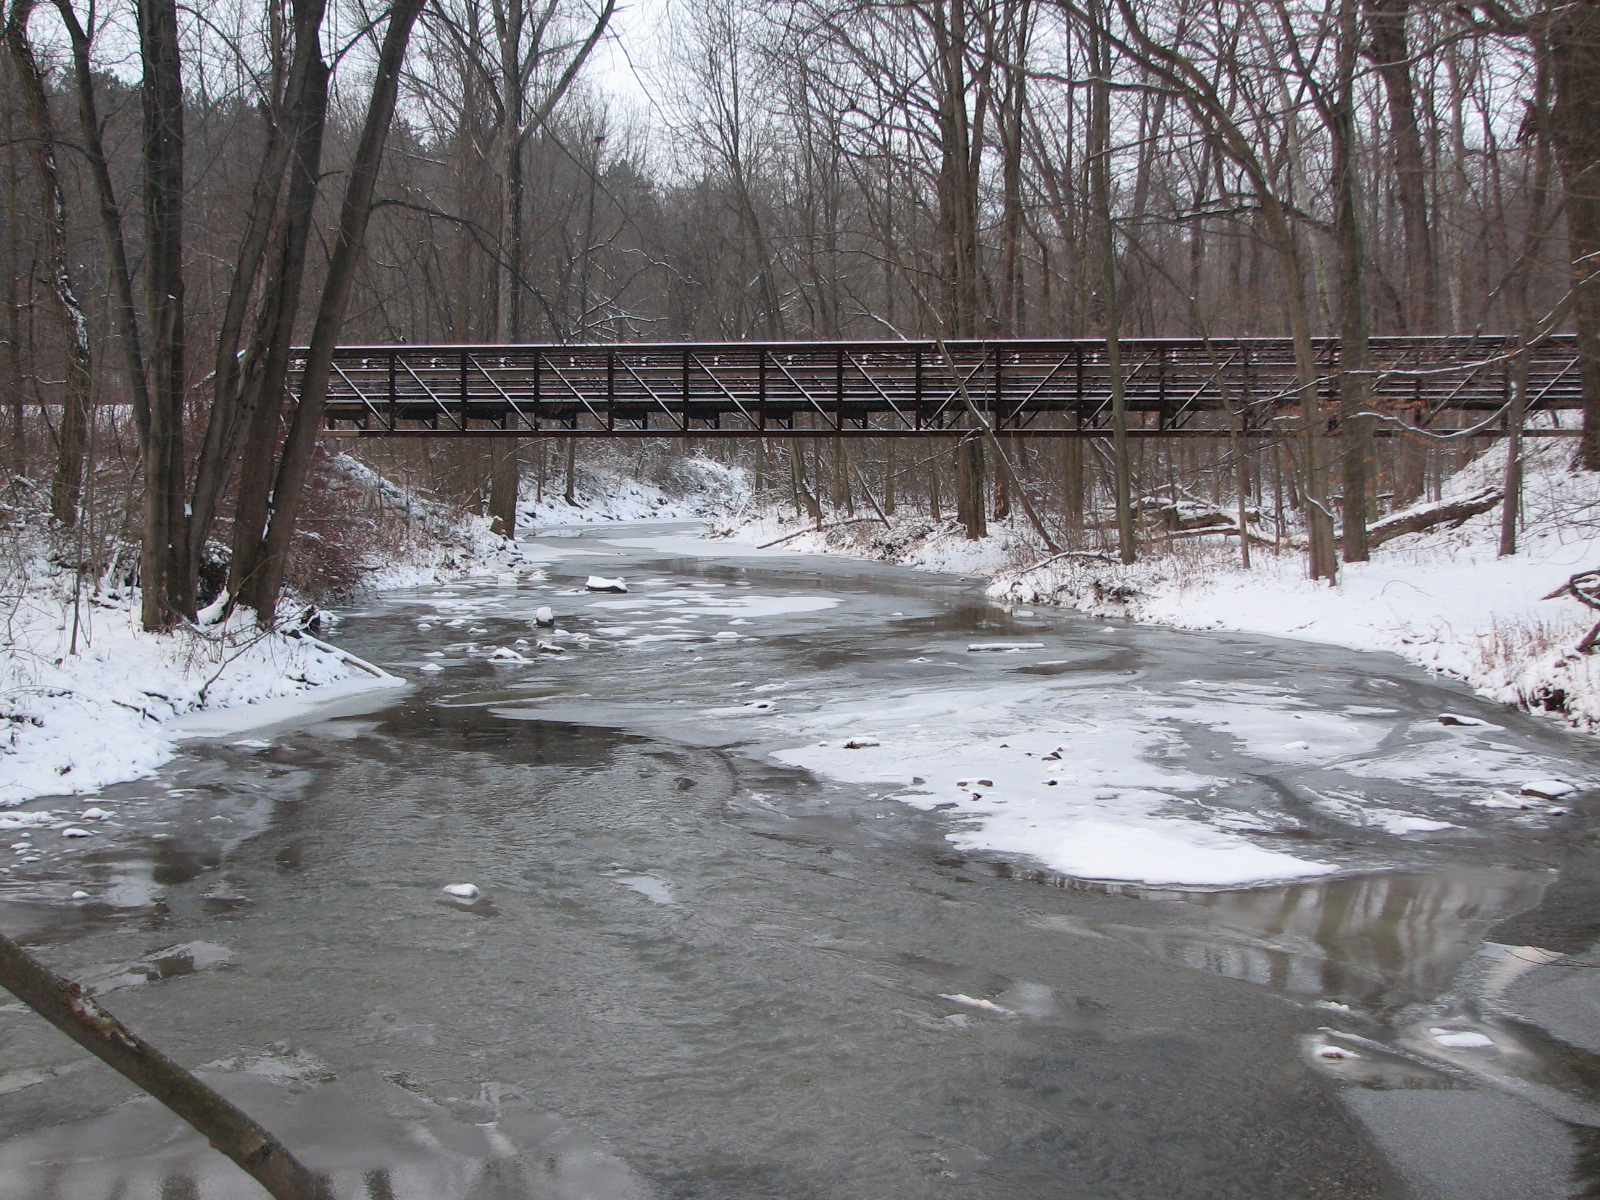 Pedestrian bridge from the snowy banks of the Beaver Creek